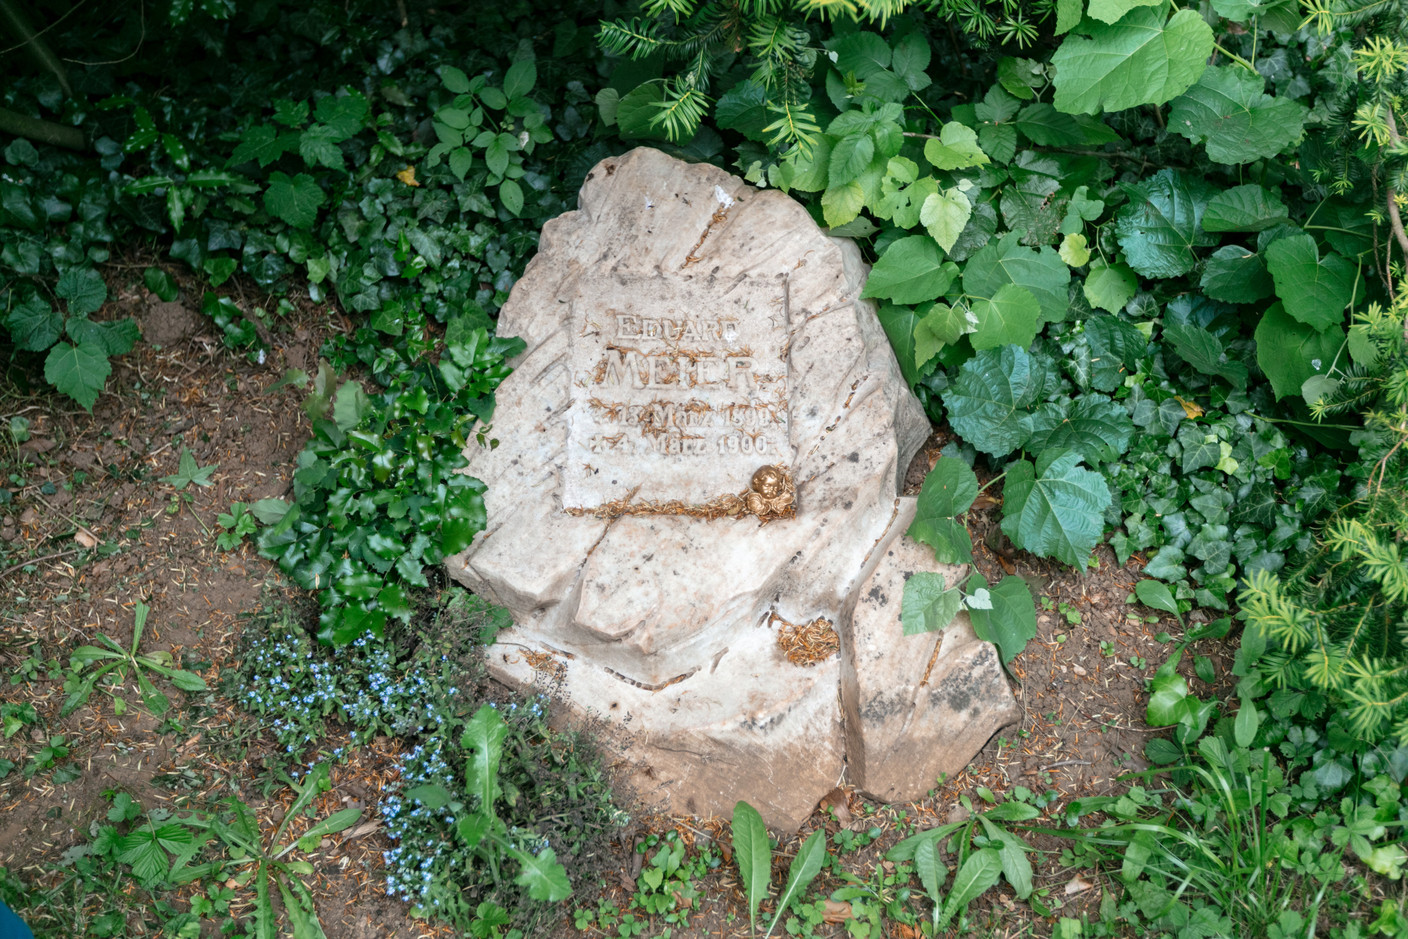 A grave marker of a child, who Manes says was the son of a past owner Romain Gamba / Maison Moderne